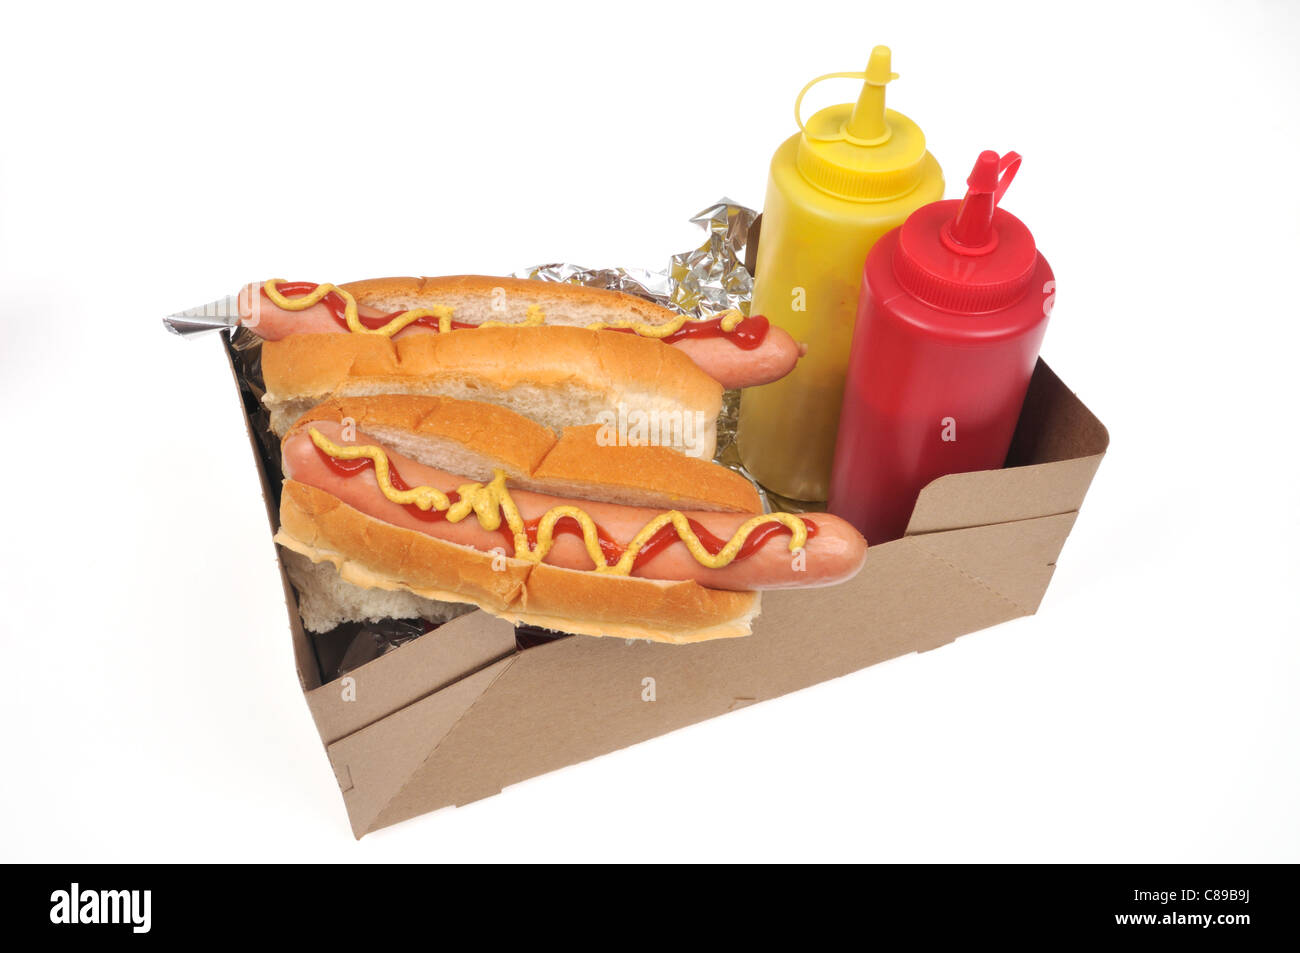 2 hot dogs with rolls in a take away tray with mustard and ketchup condiments on white background. Stock Photo